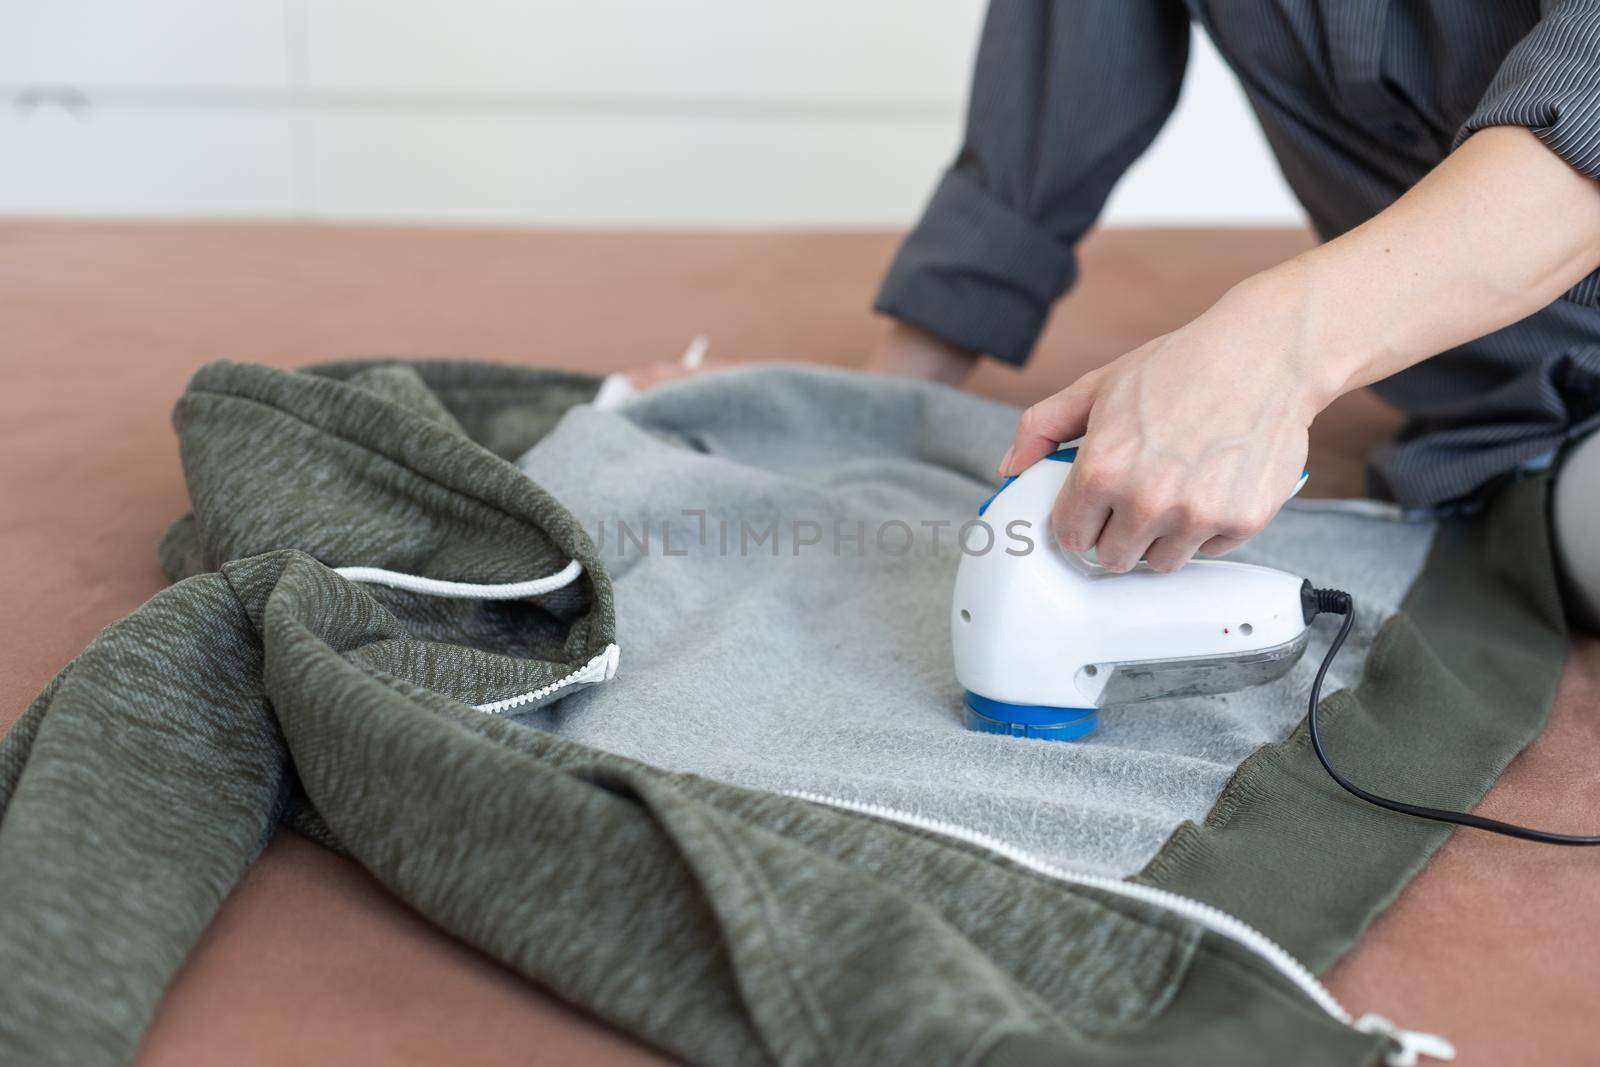 Wireless device for cleaning knitted fabrics from lint. The woman is removing the lint from the sweater